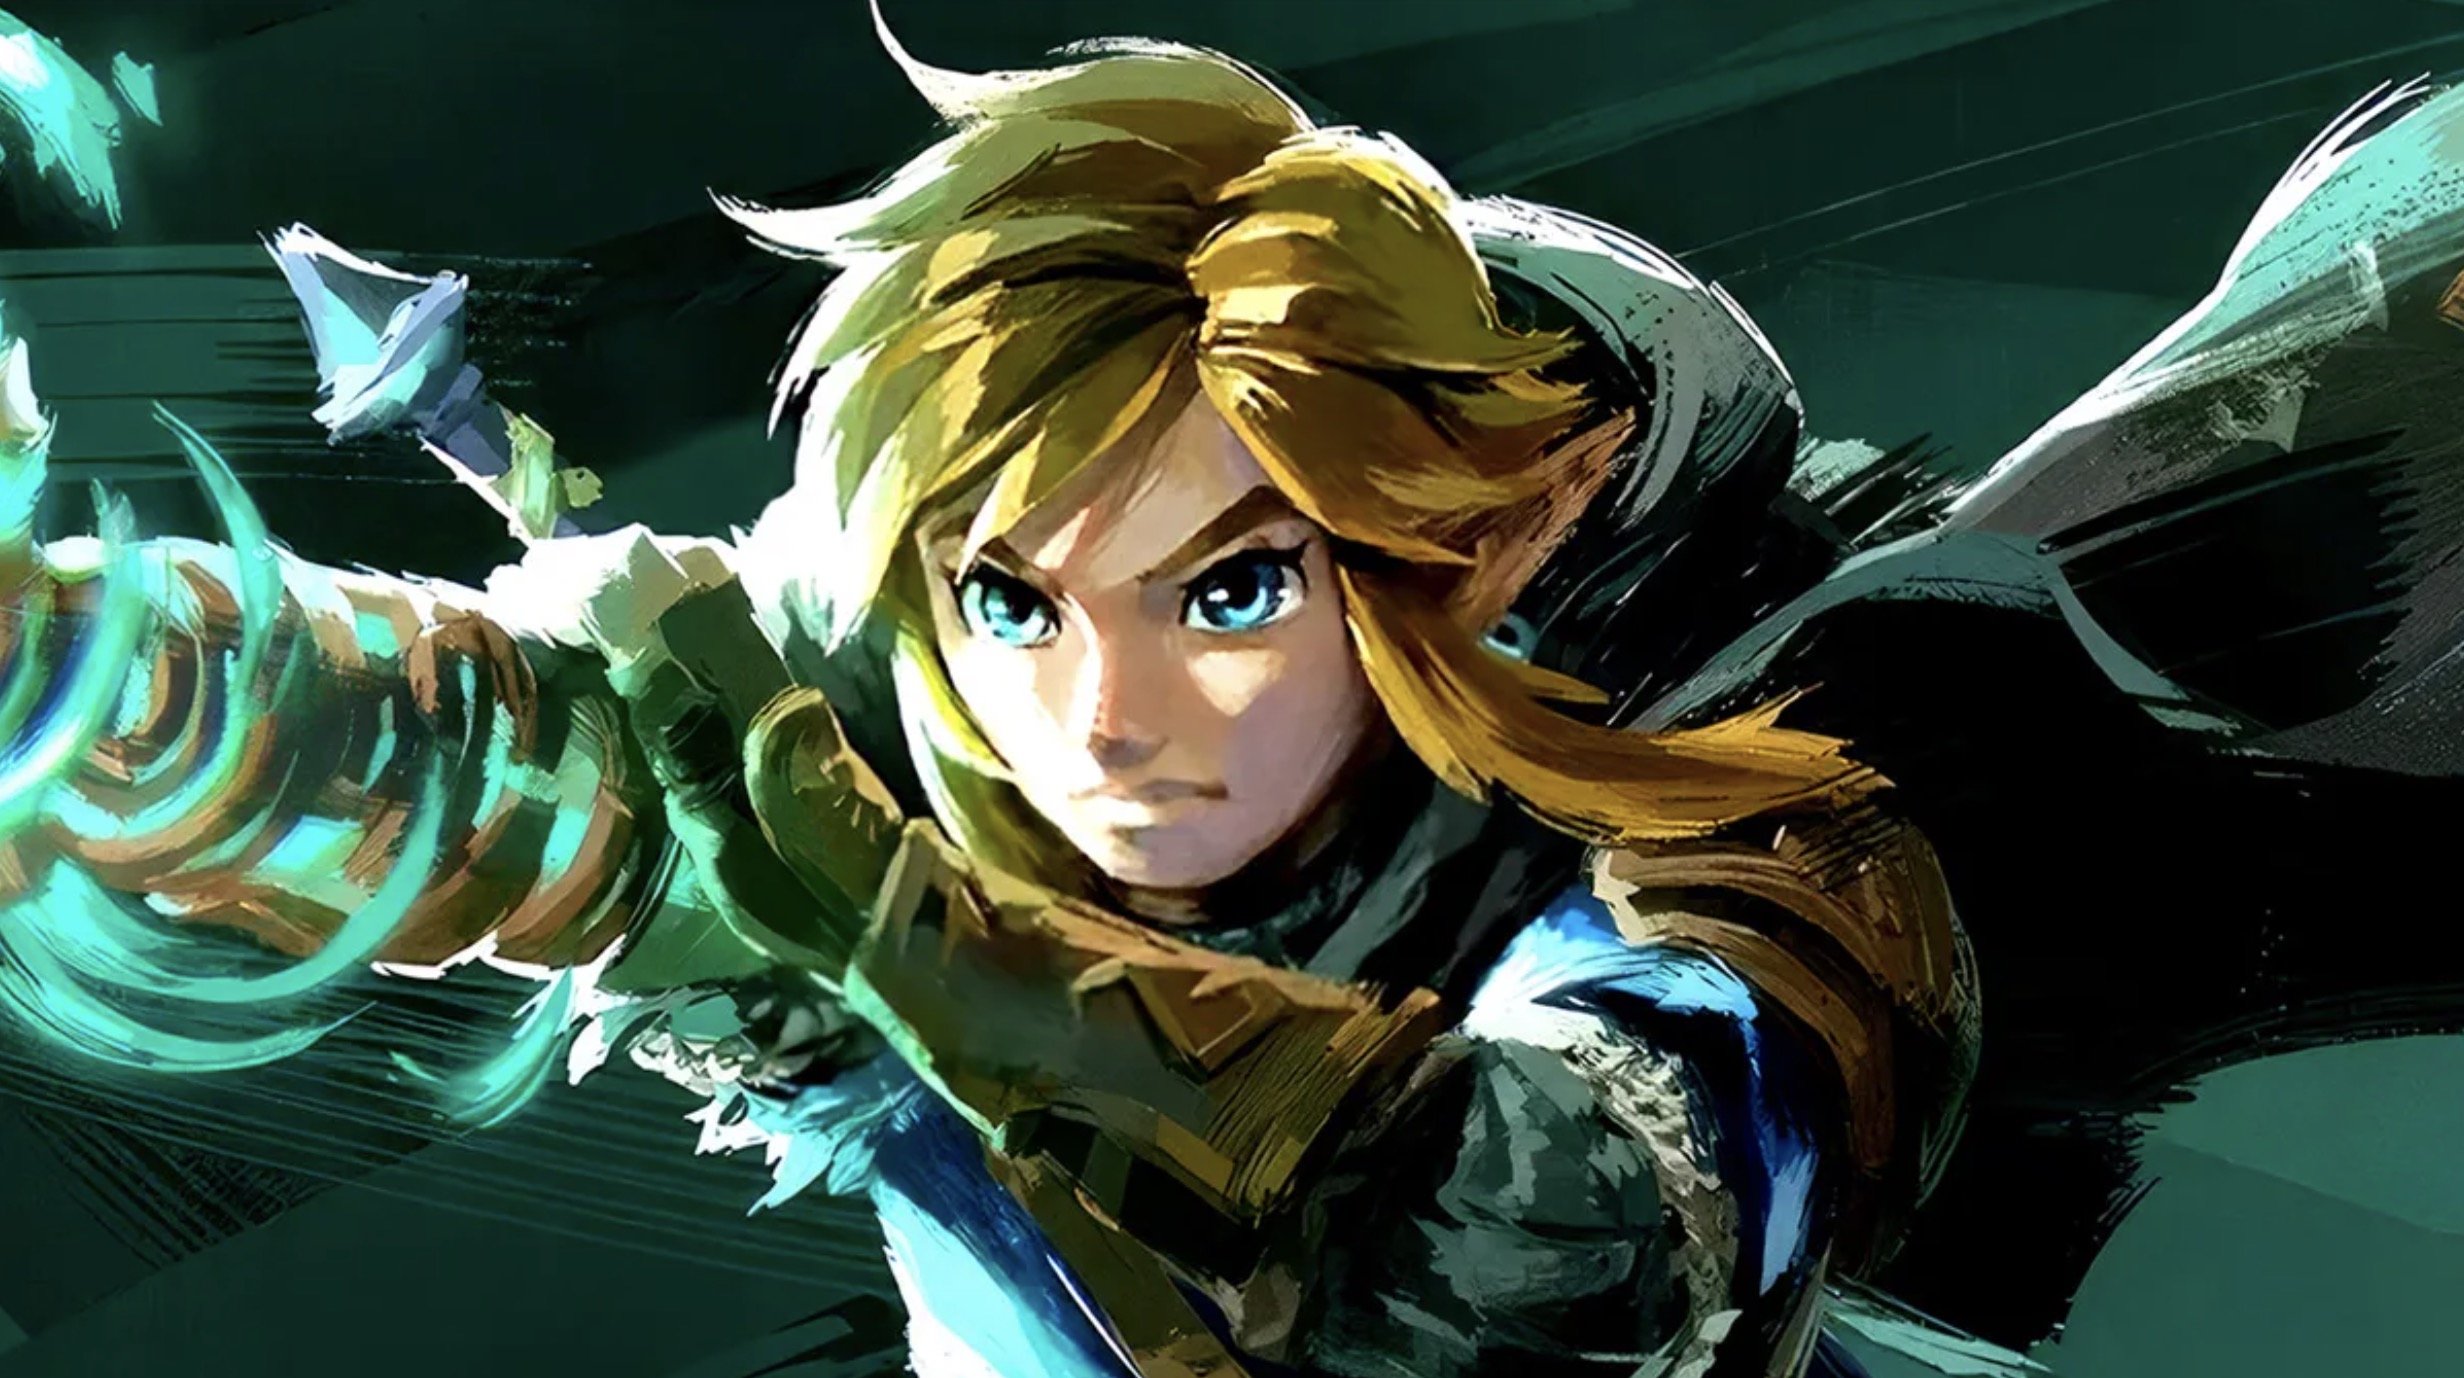 Nintendo confirms The Legend of Zelda is being turned into a movie, Entertainment